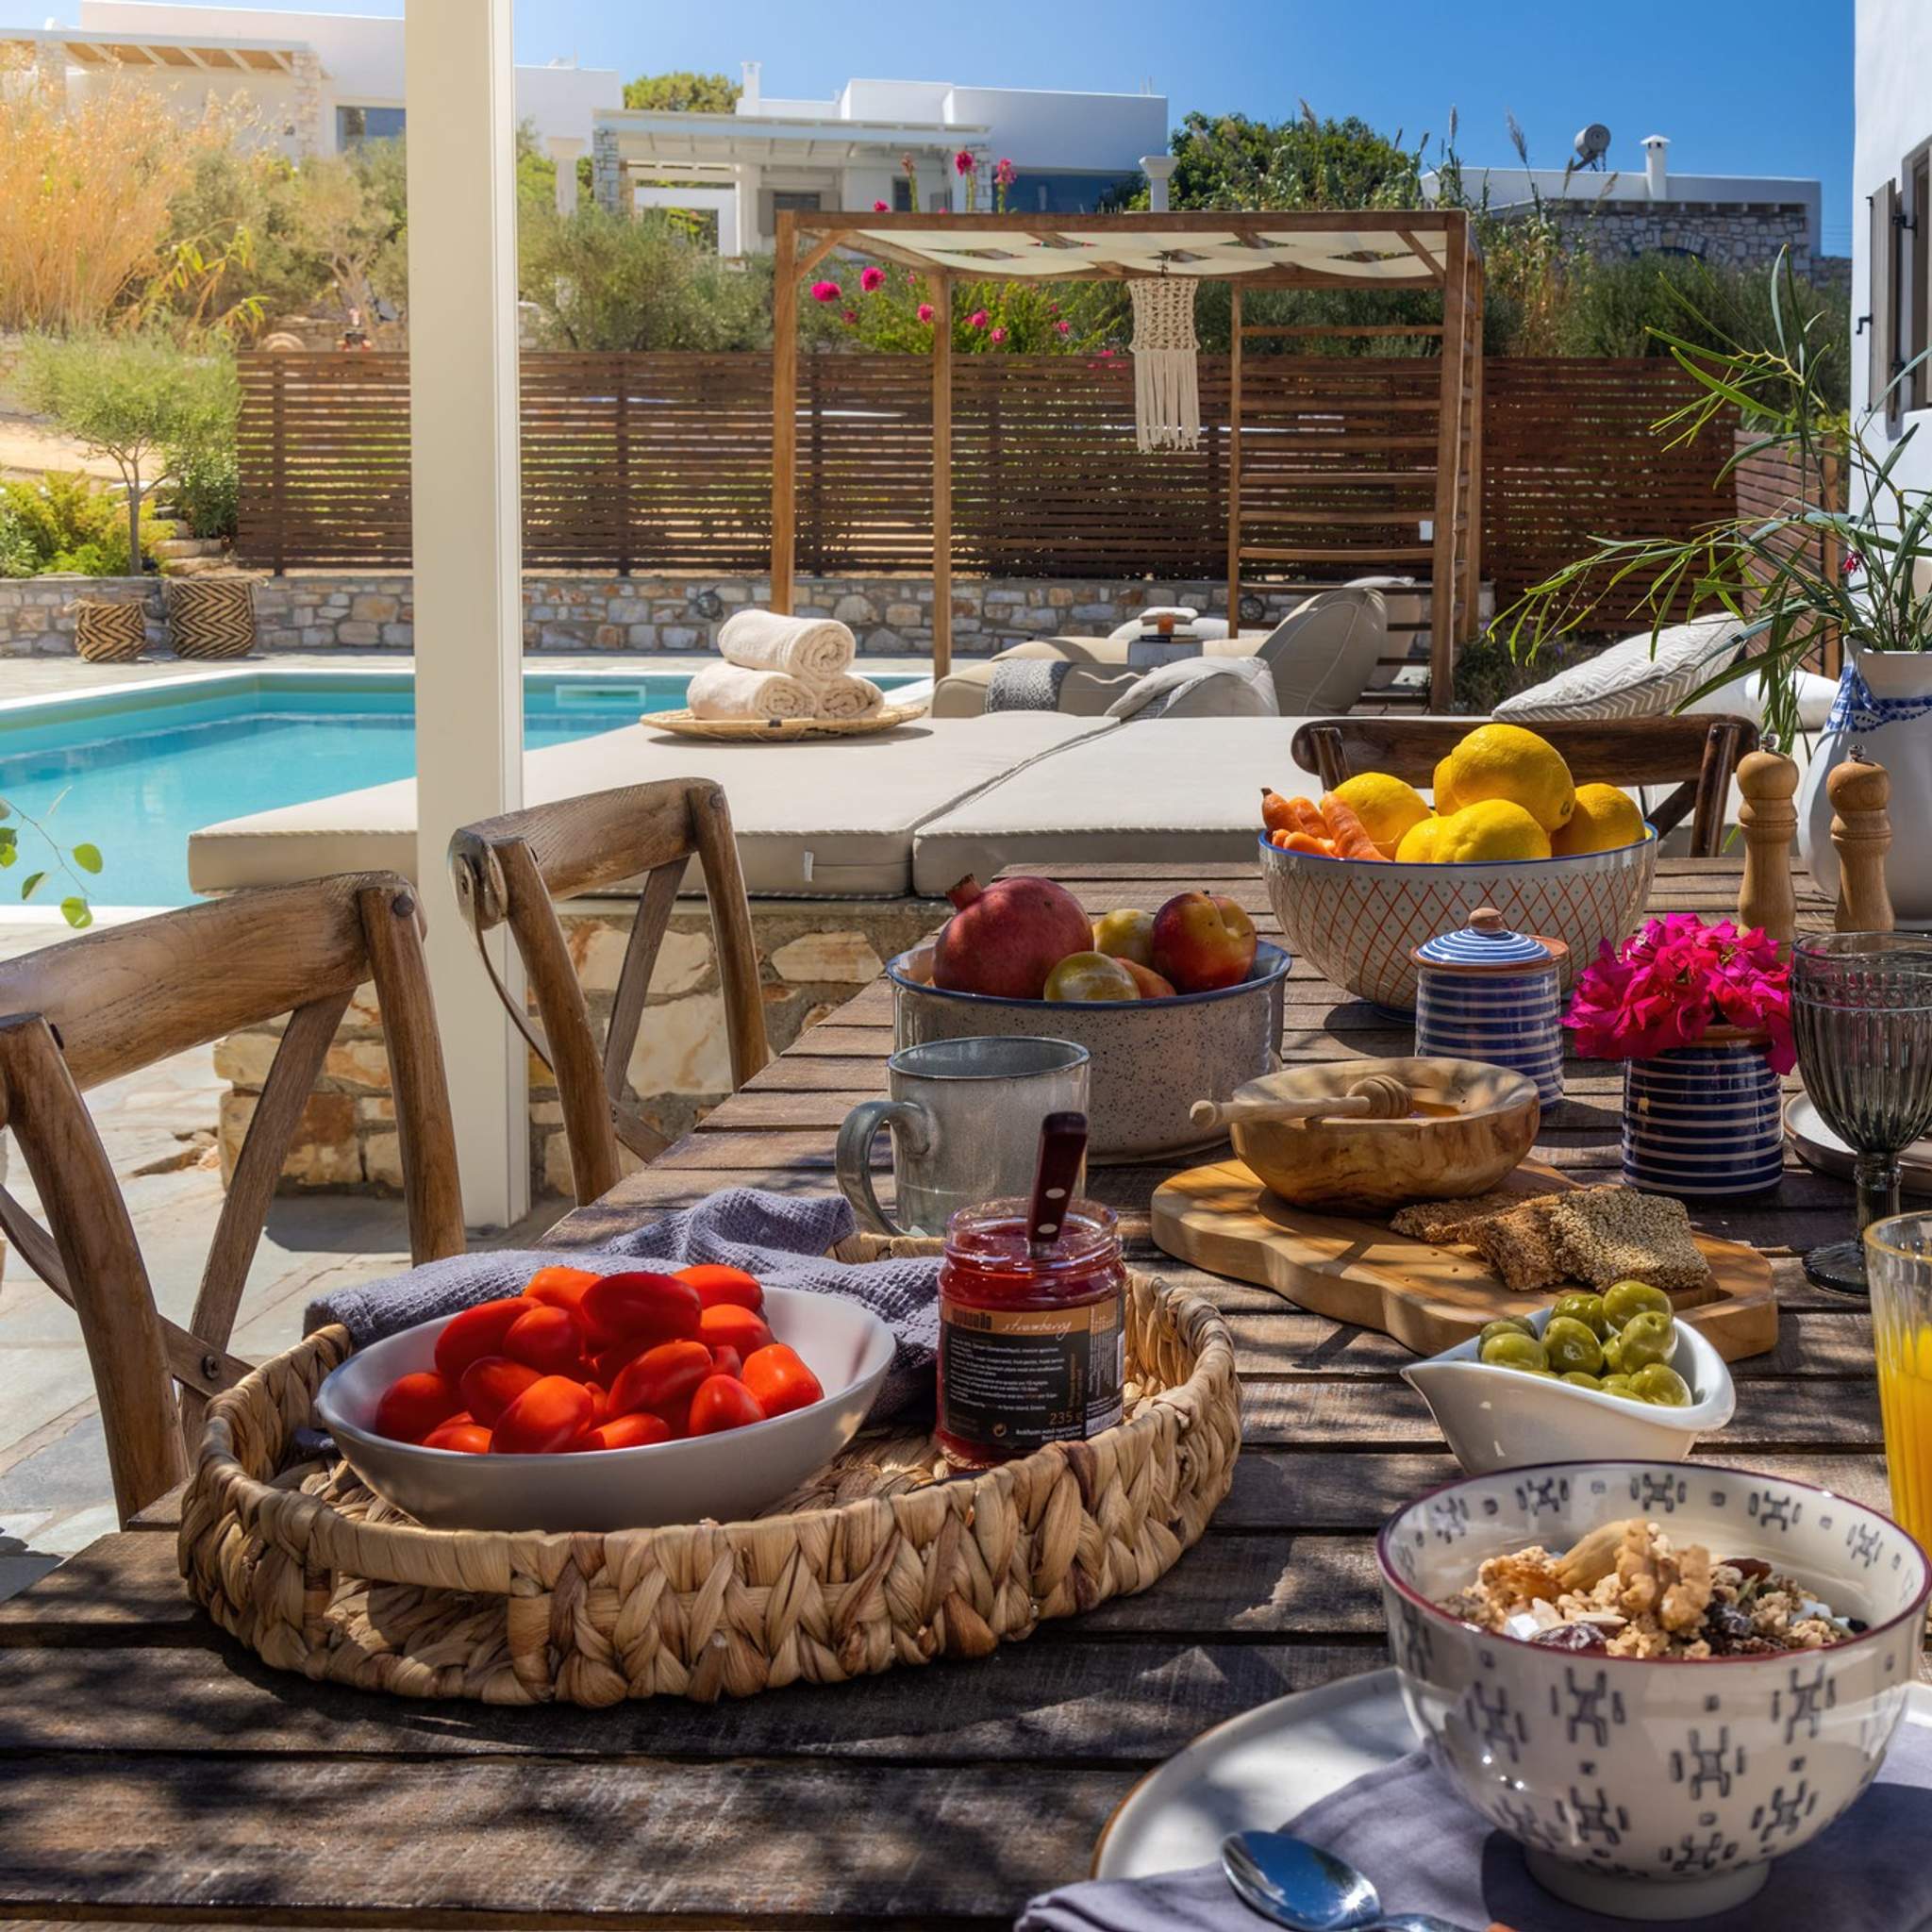 Aiolos. Rise and shine to a picture-perfect morning! Start your day with a delectable breakfast by the pool, where the sun's golden rays dance upon the water's surface. Savor each bite as you soak in the warmth and serenity of this blissful paradise. 💫
.
#amalgamhomes #artofcomfort #greece #visitgreece #greekislands #cyclades #greekislands #paros #naxos #mykonos #tinos #ampelas #kastraki #triantaros #travel #wanderlust #greeksummer #discovergreece